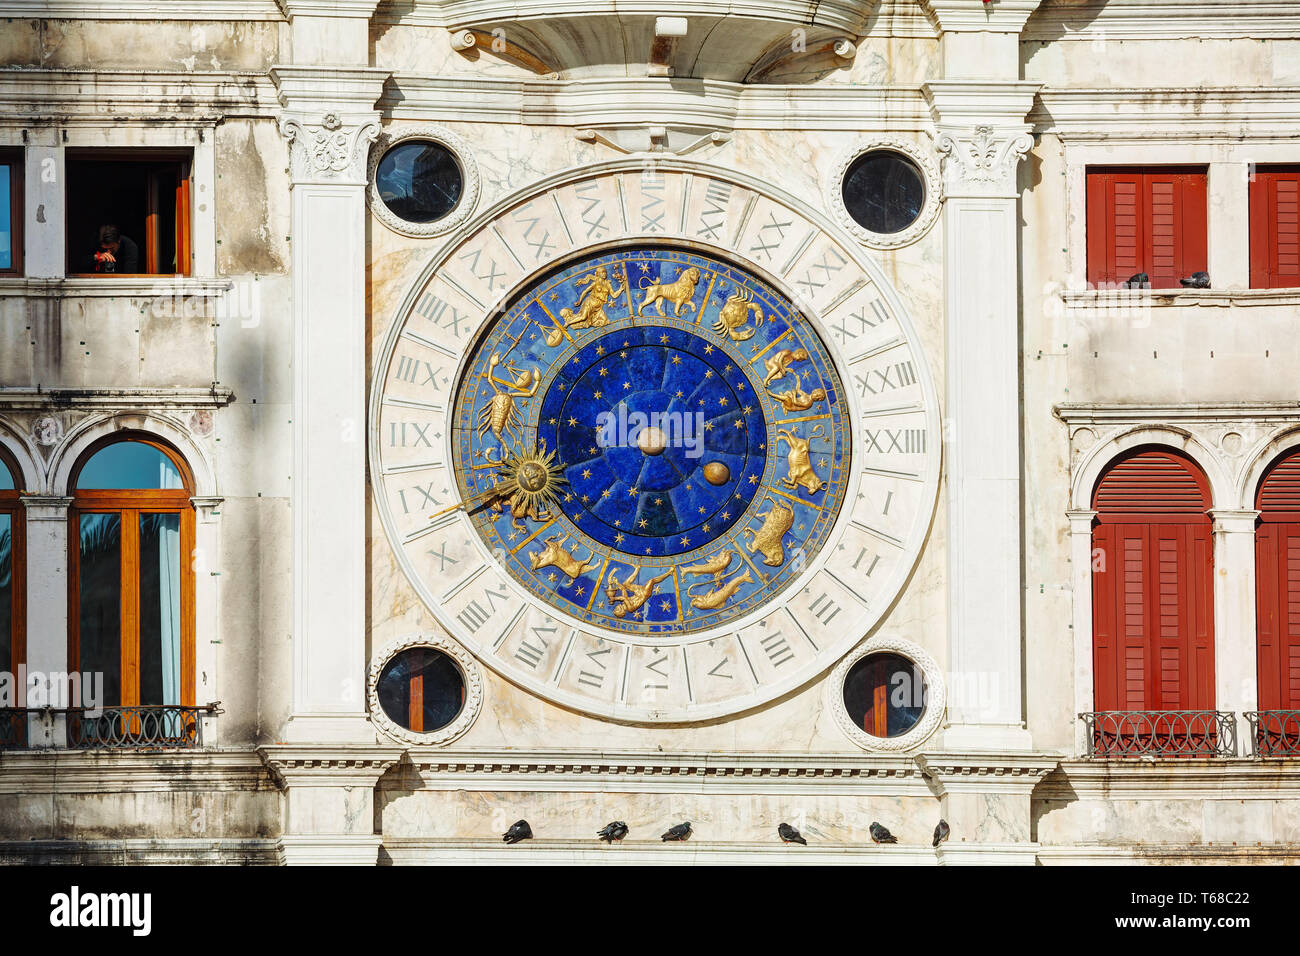 Astrological clock at Torre dell'Orologio in Venice Stock Photo